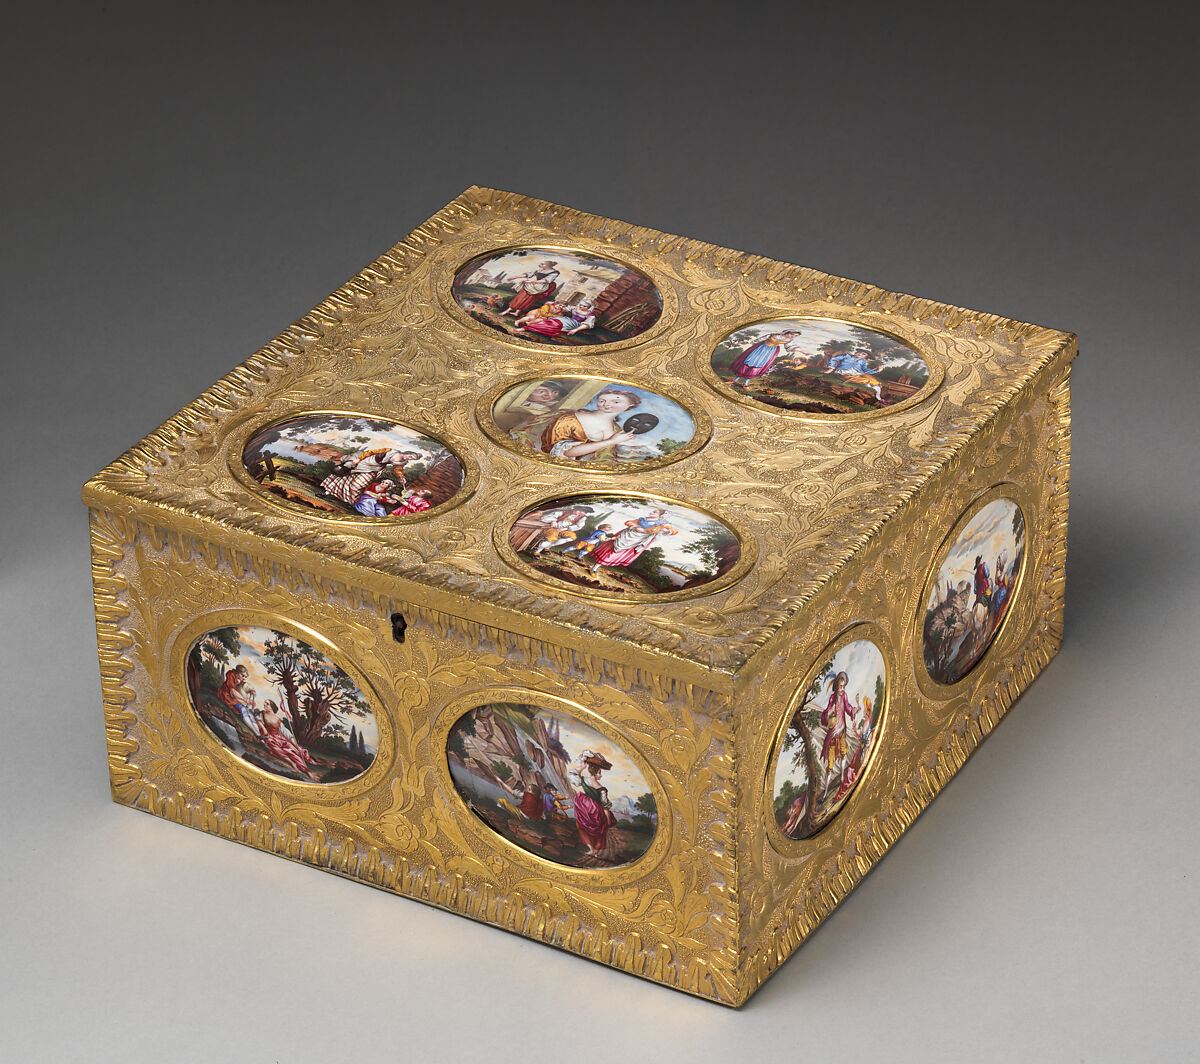 Casket, Painted enamel on copper; gilt pinchbeck metal, British box with Italian plaques 